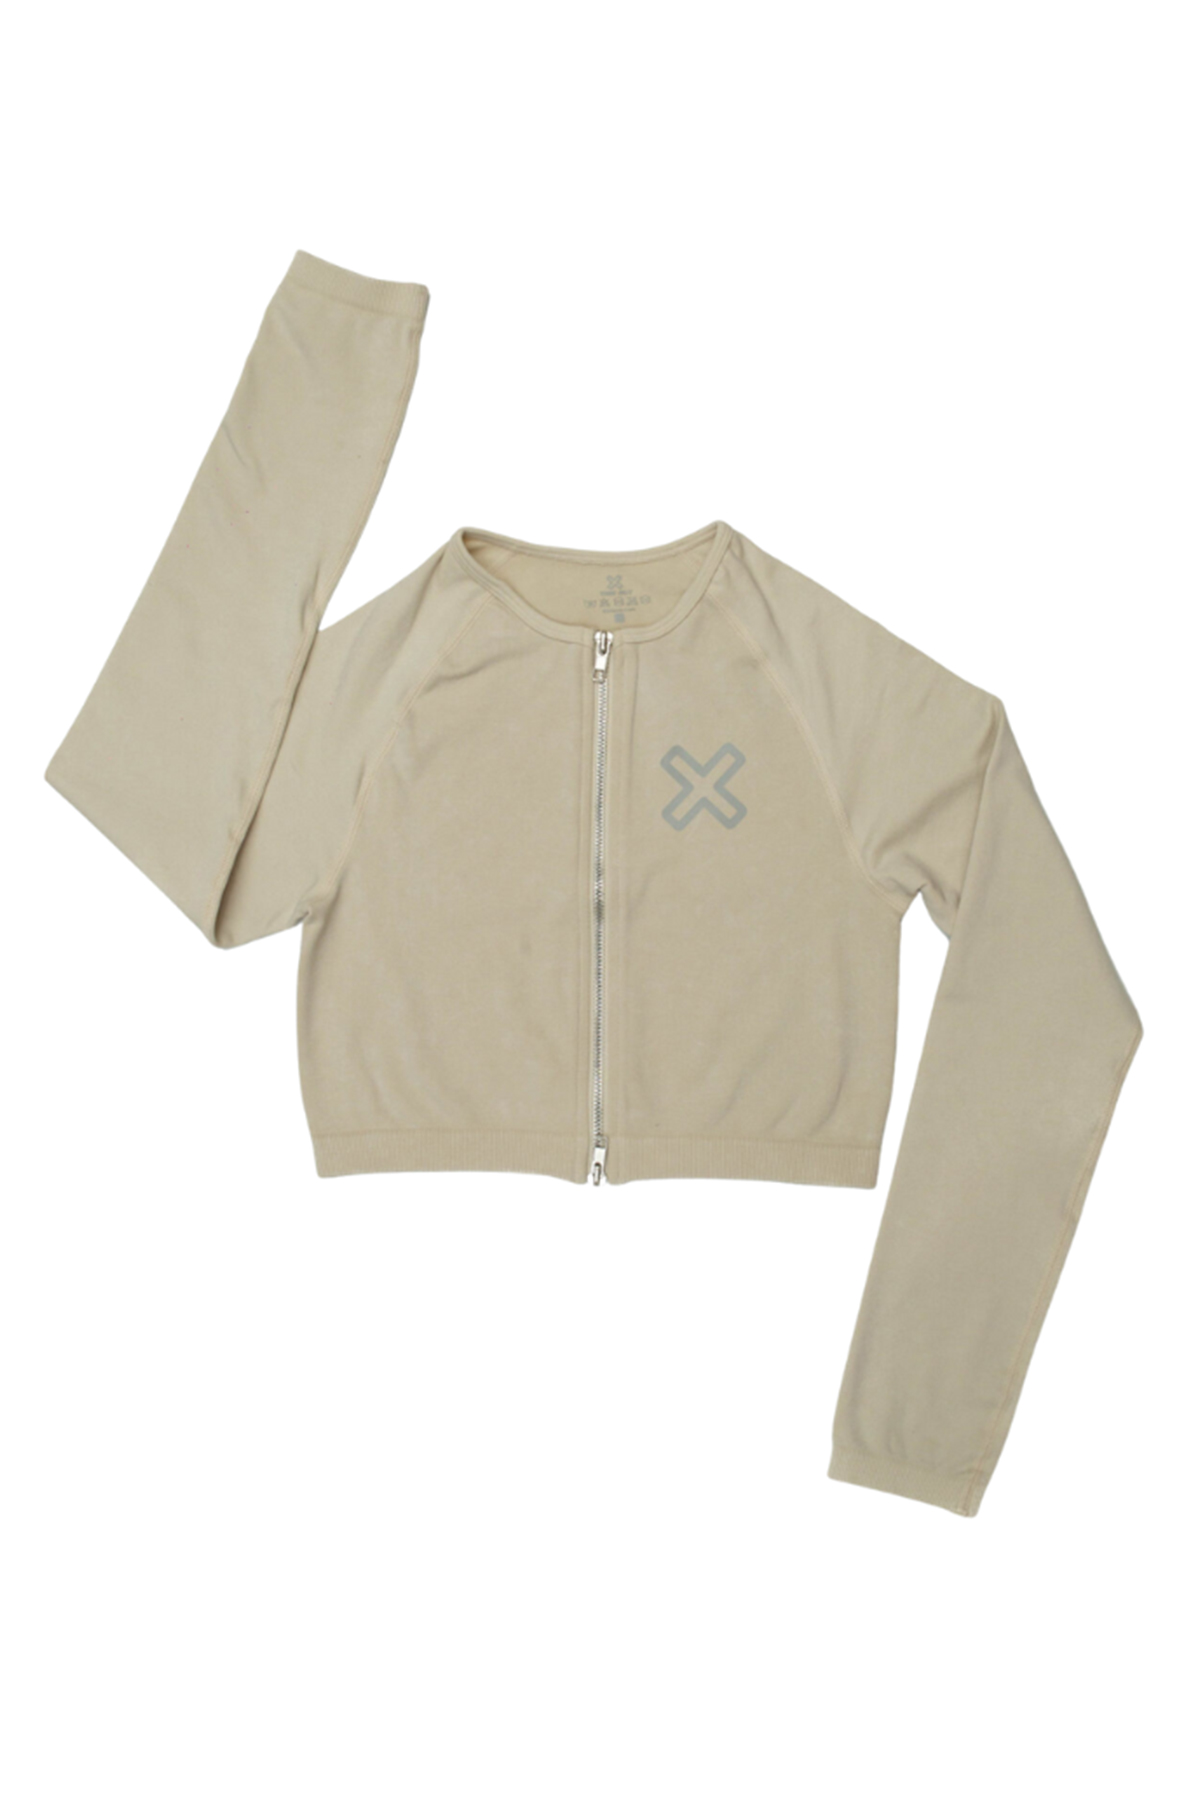 Time-Out-X-Zip-Up-Longsleeve-Workout-Crop-Top—Creamy-White—Front